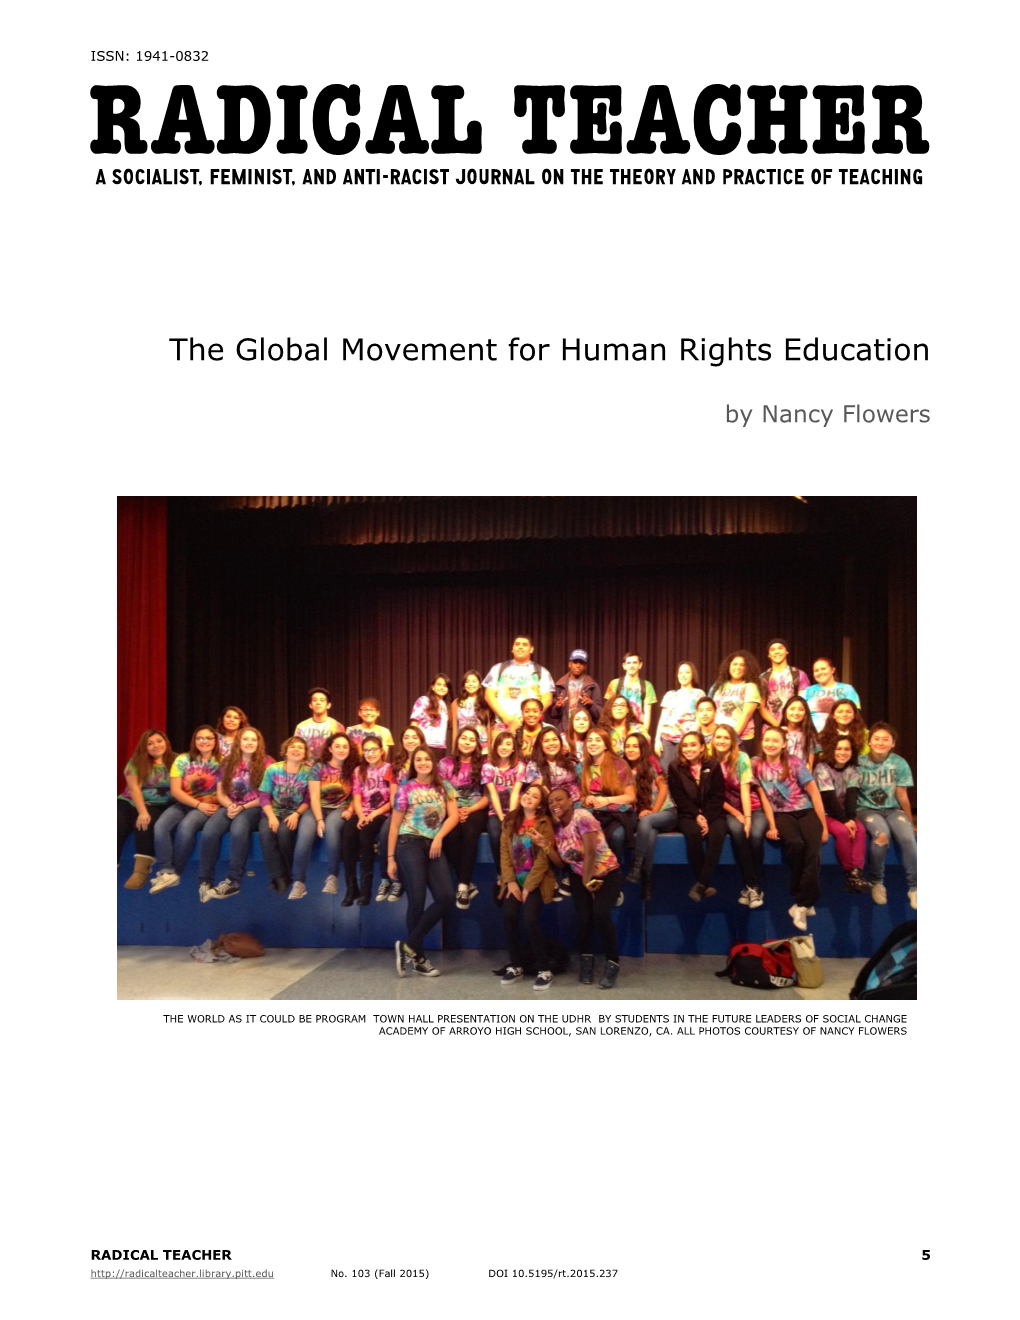 The Global Movement for Human Rights Education